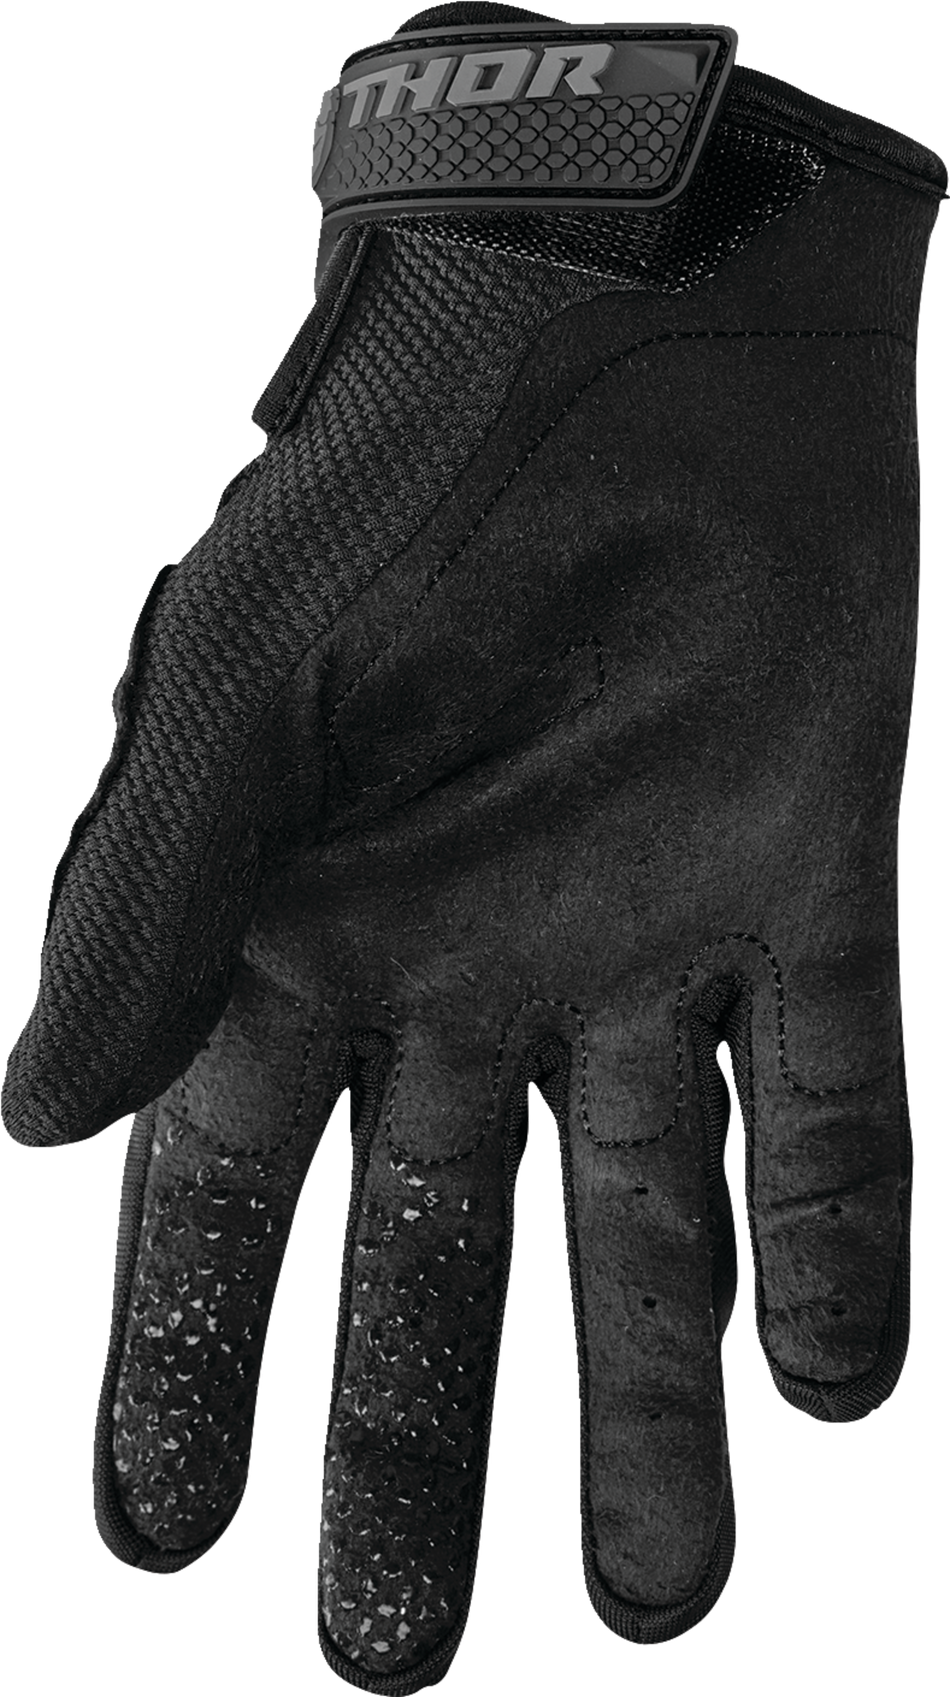 THOR Sector Gloves - Black/Gray - XS 3330-7249